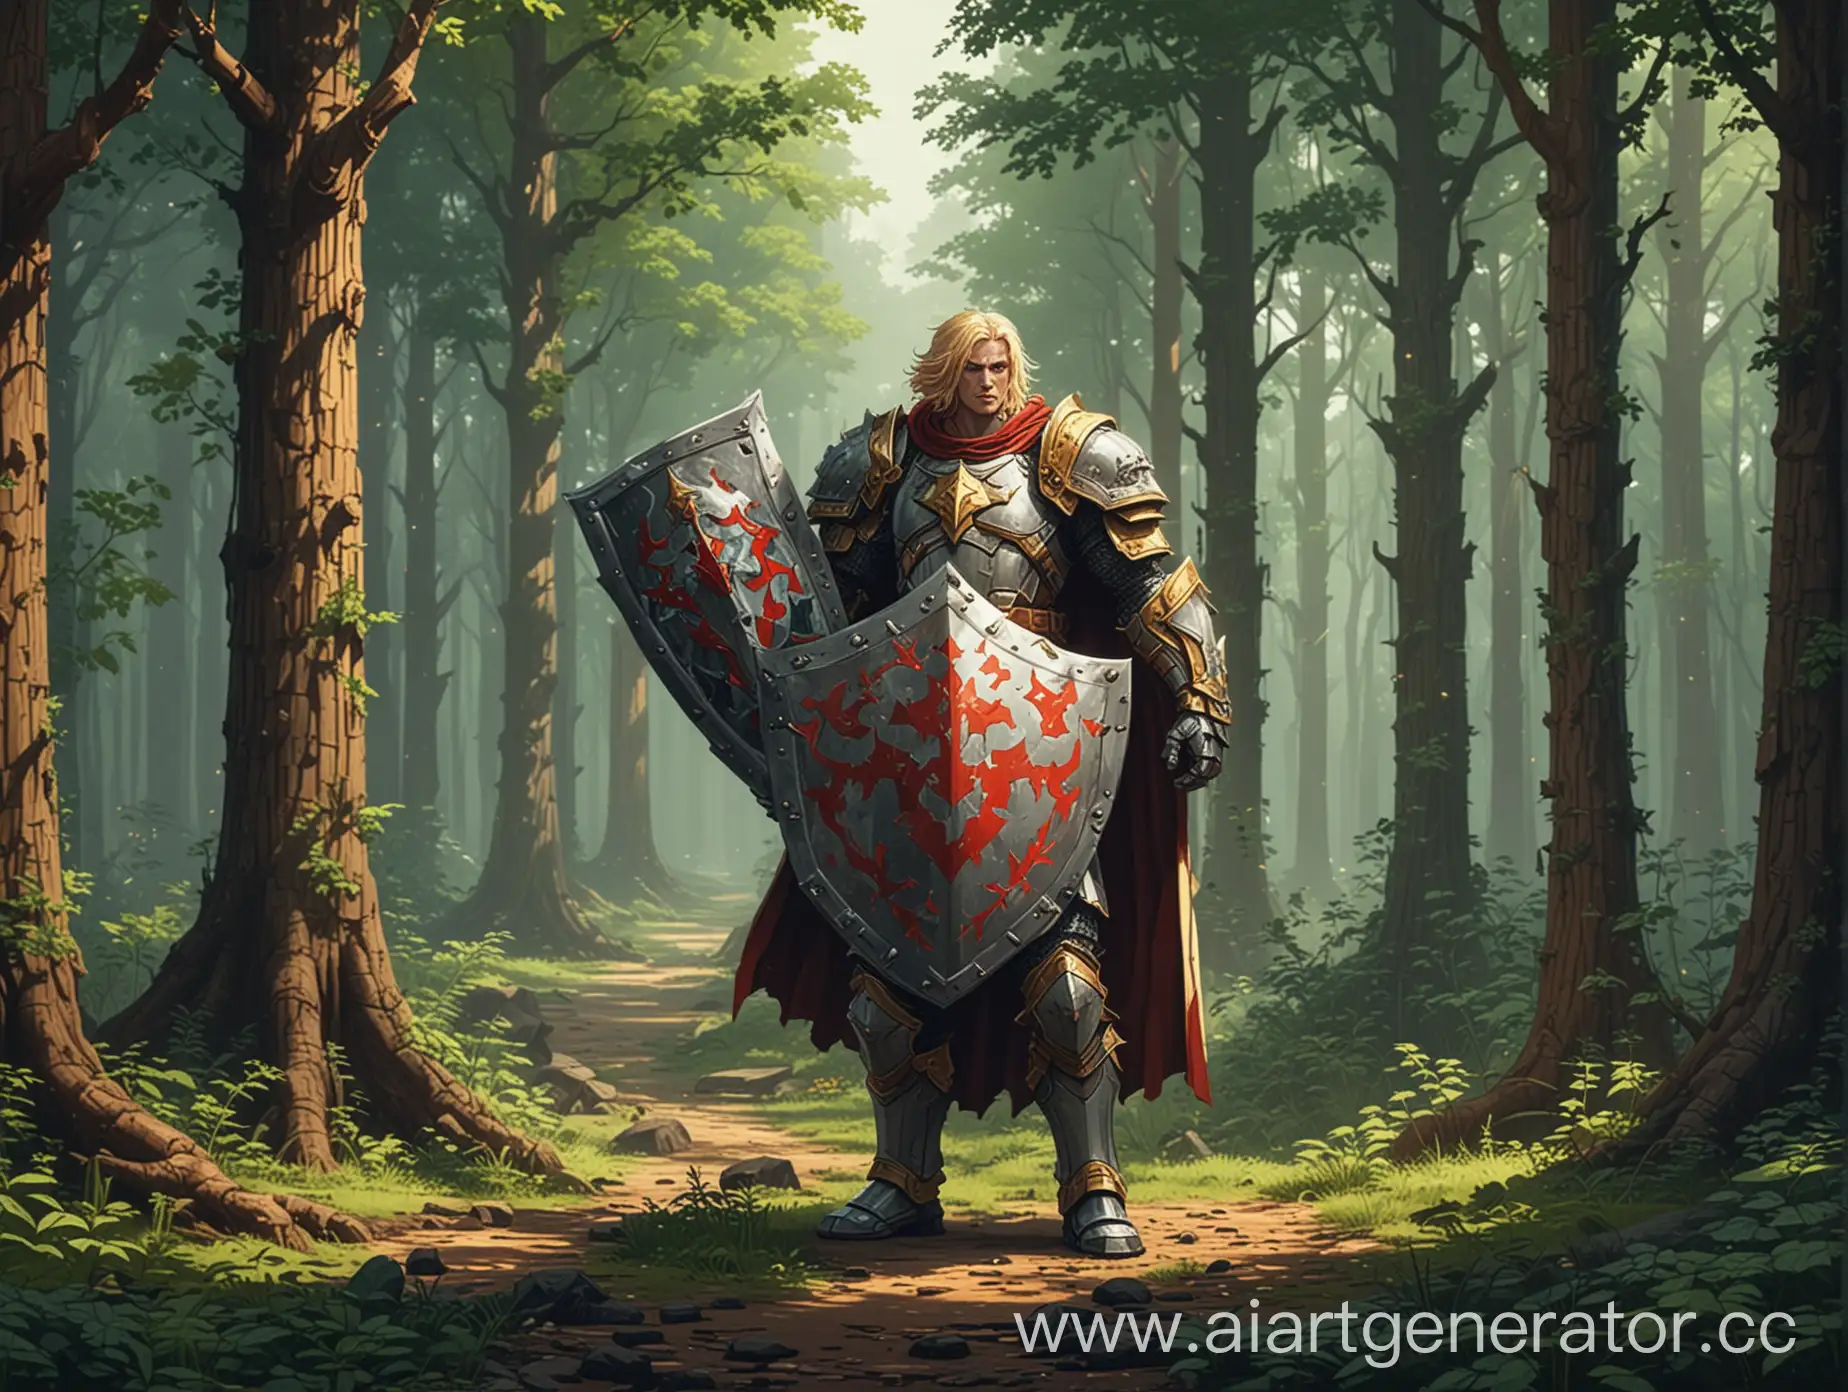 Paladin-Holding-Massive-Shield-in-Pixel-Art-Forest